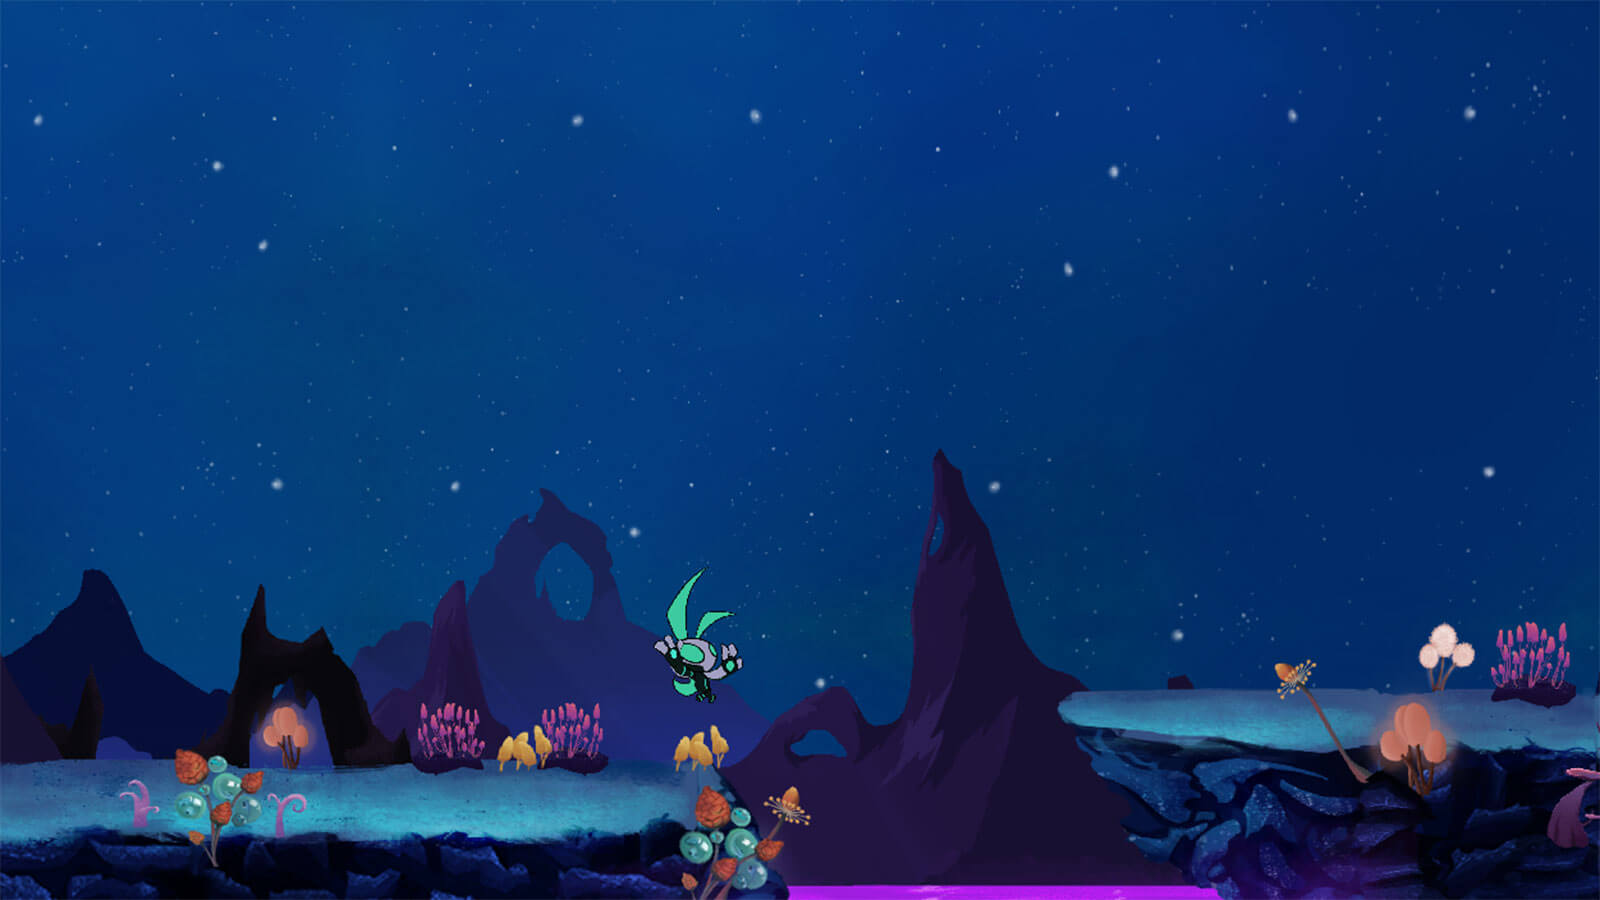 Player jumps over an area full of purple liquid to a rocky platform.